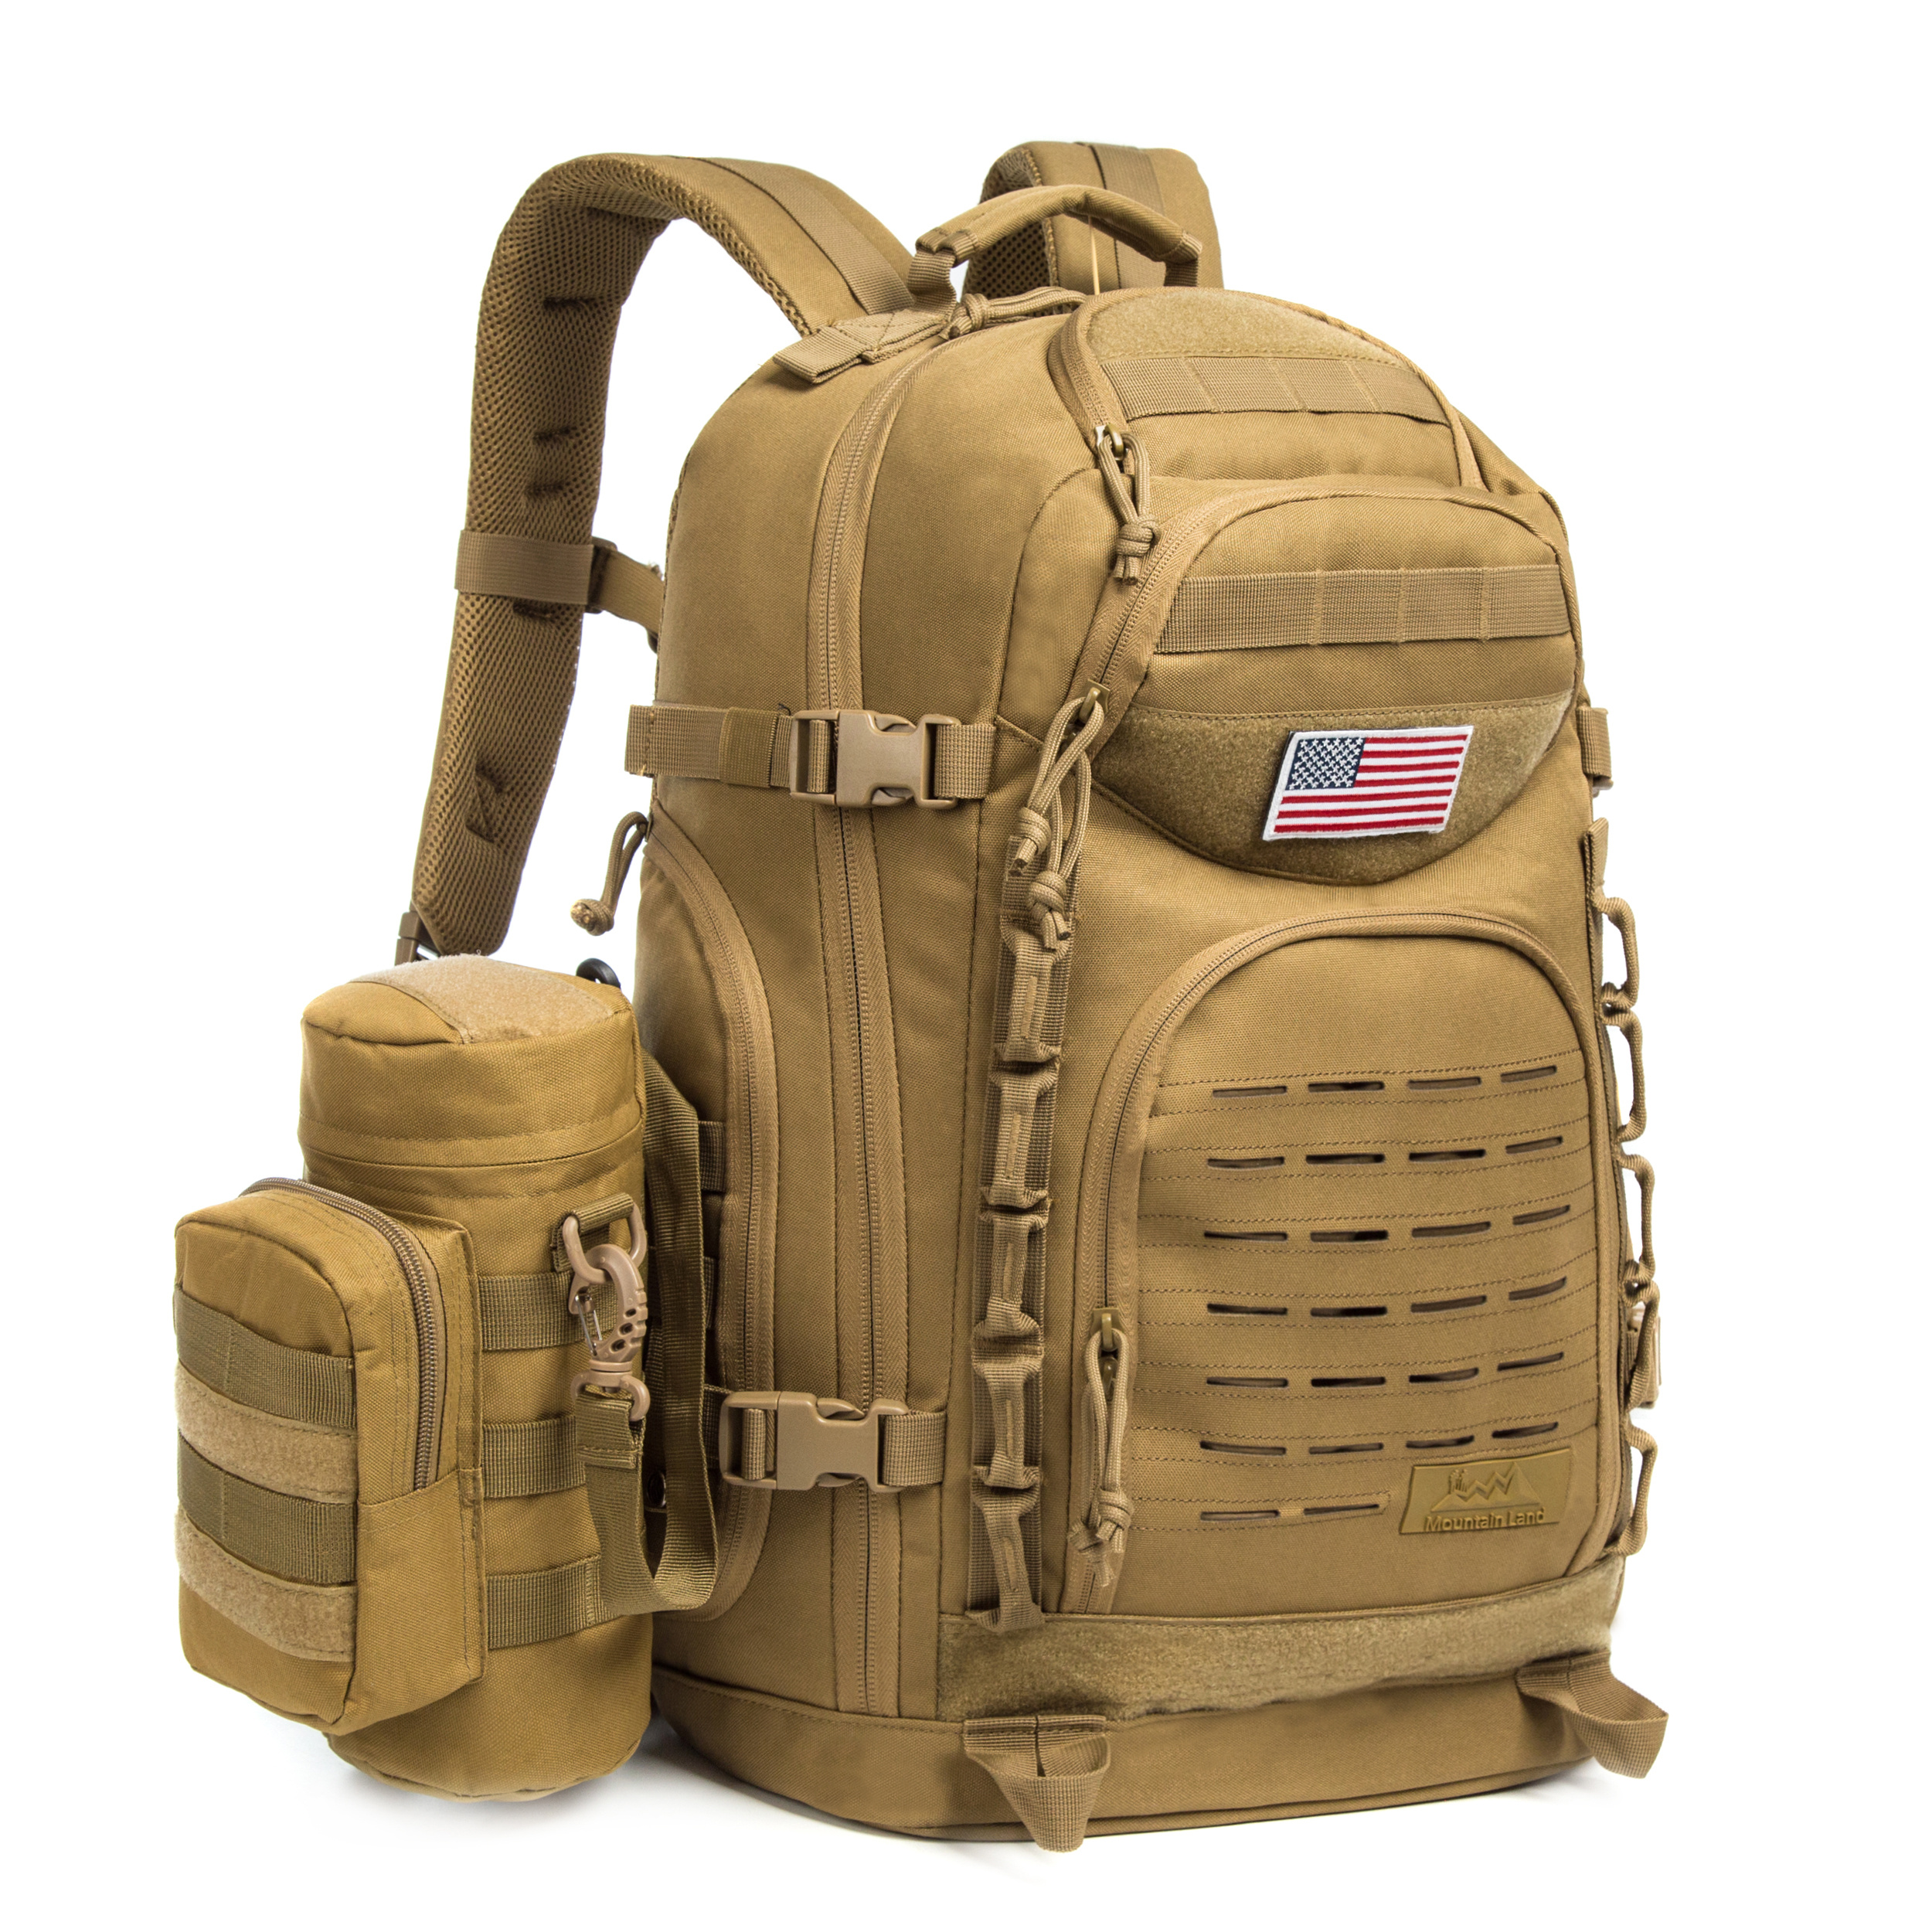 Khaki 38L Tactical Molle Backpack for Men Military Bag Rucksack Large Army 3 Day Assault Pack with 3L Water Bottle Bag